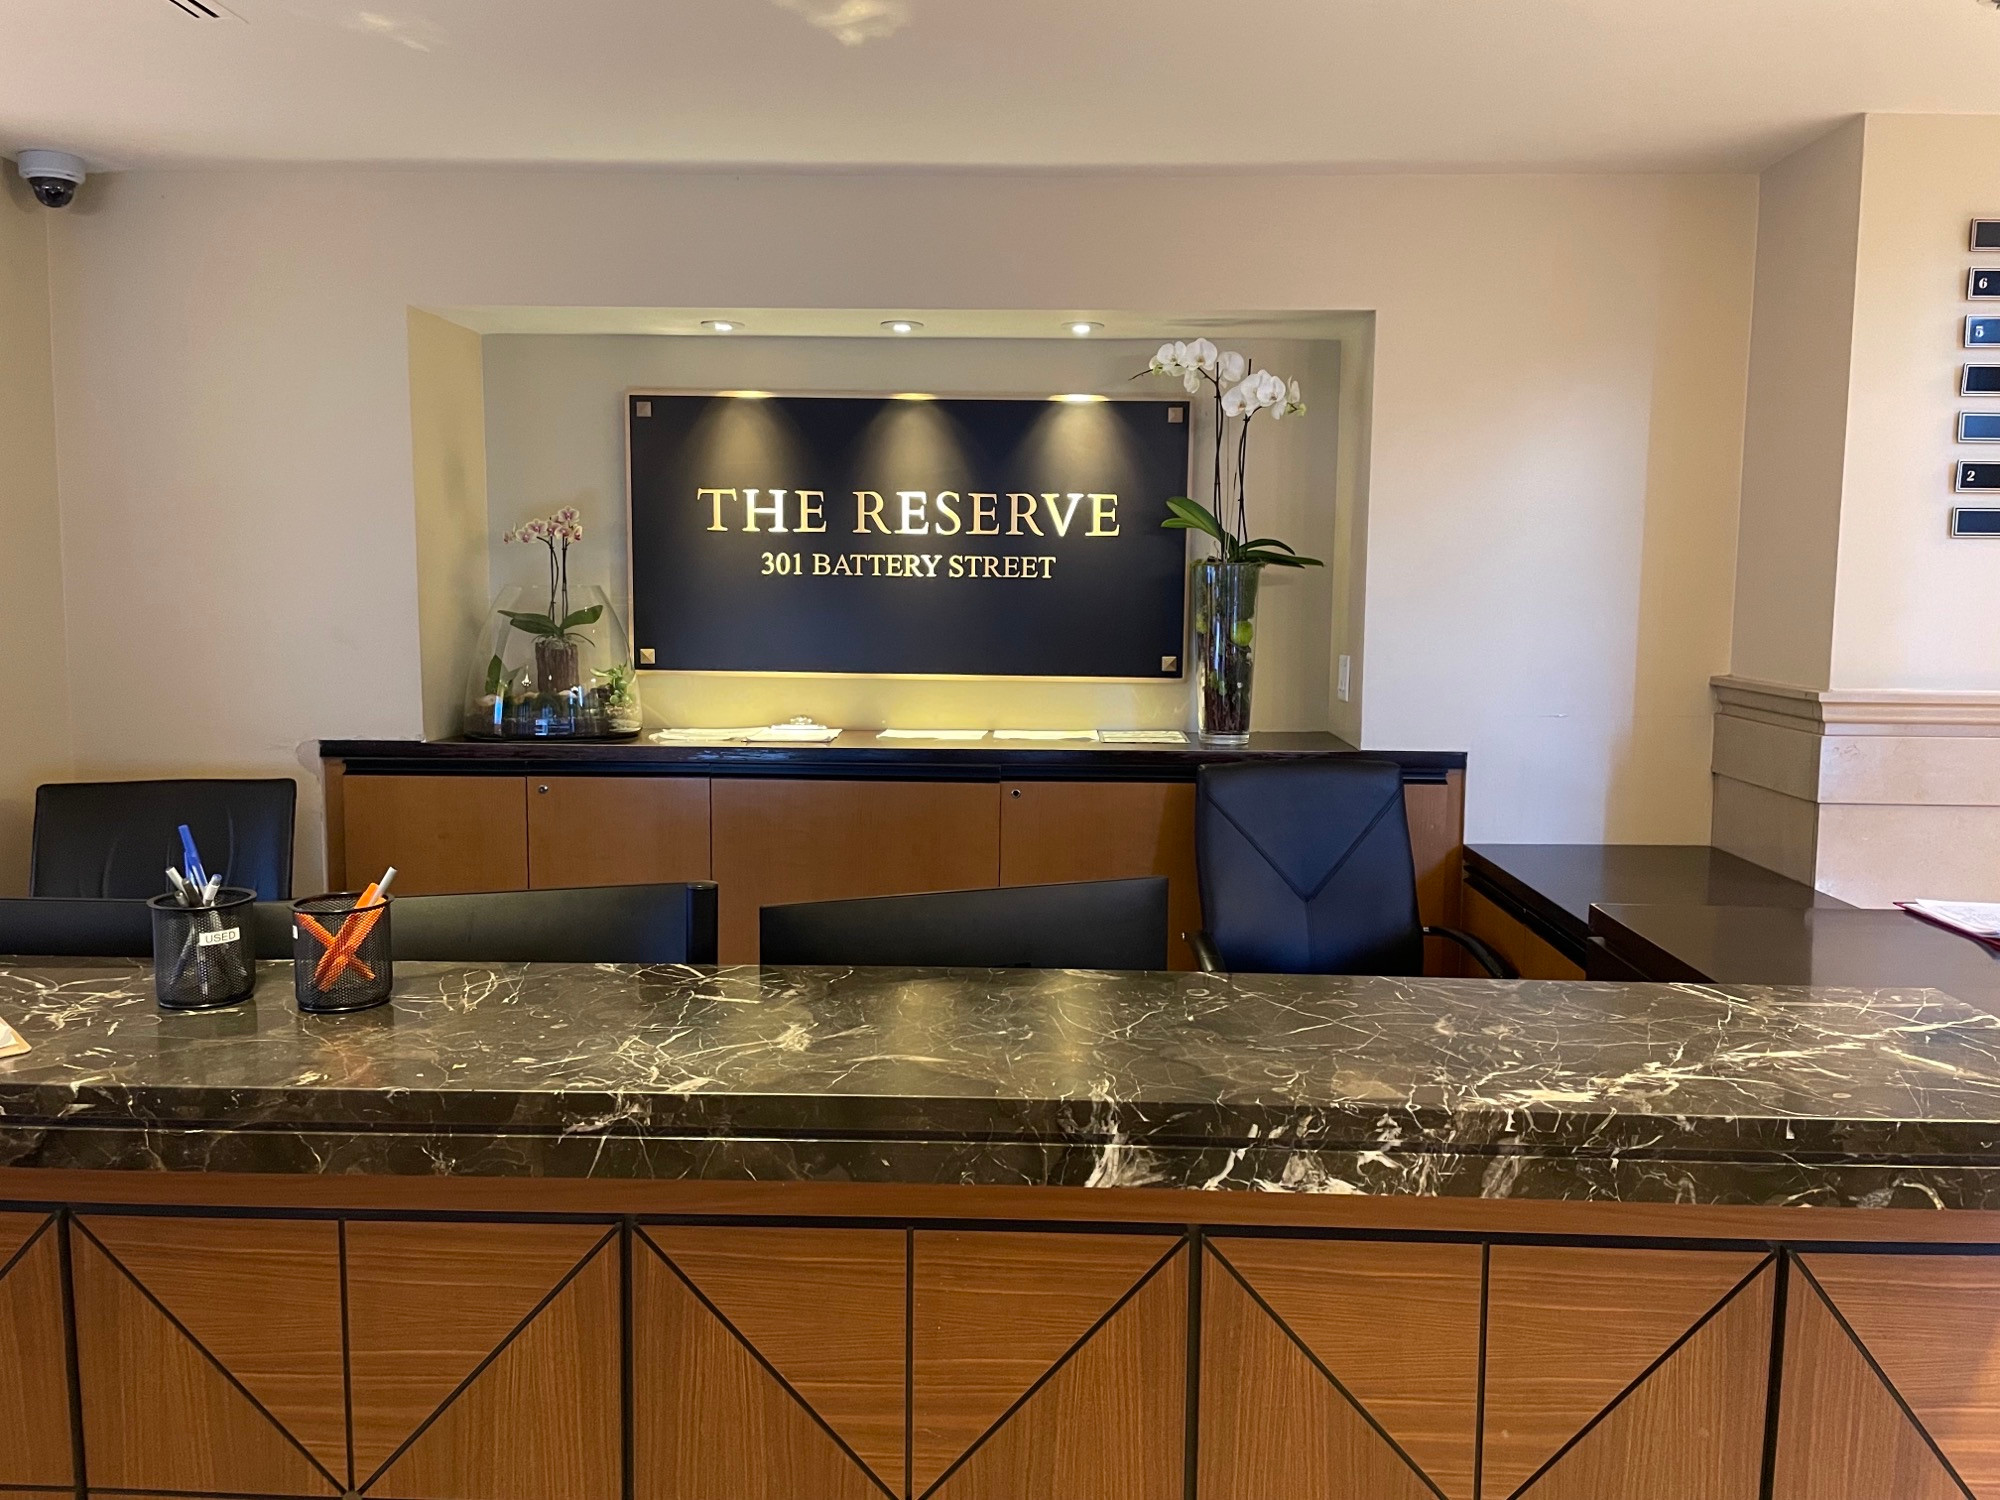 The Reserve 301 Battery Street